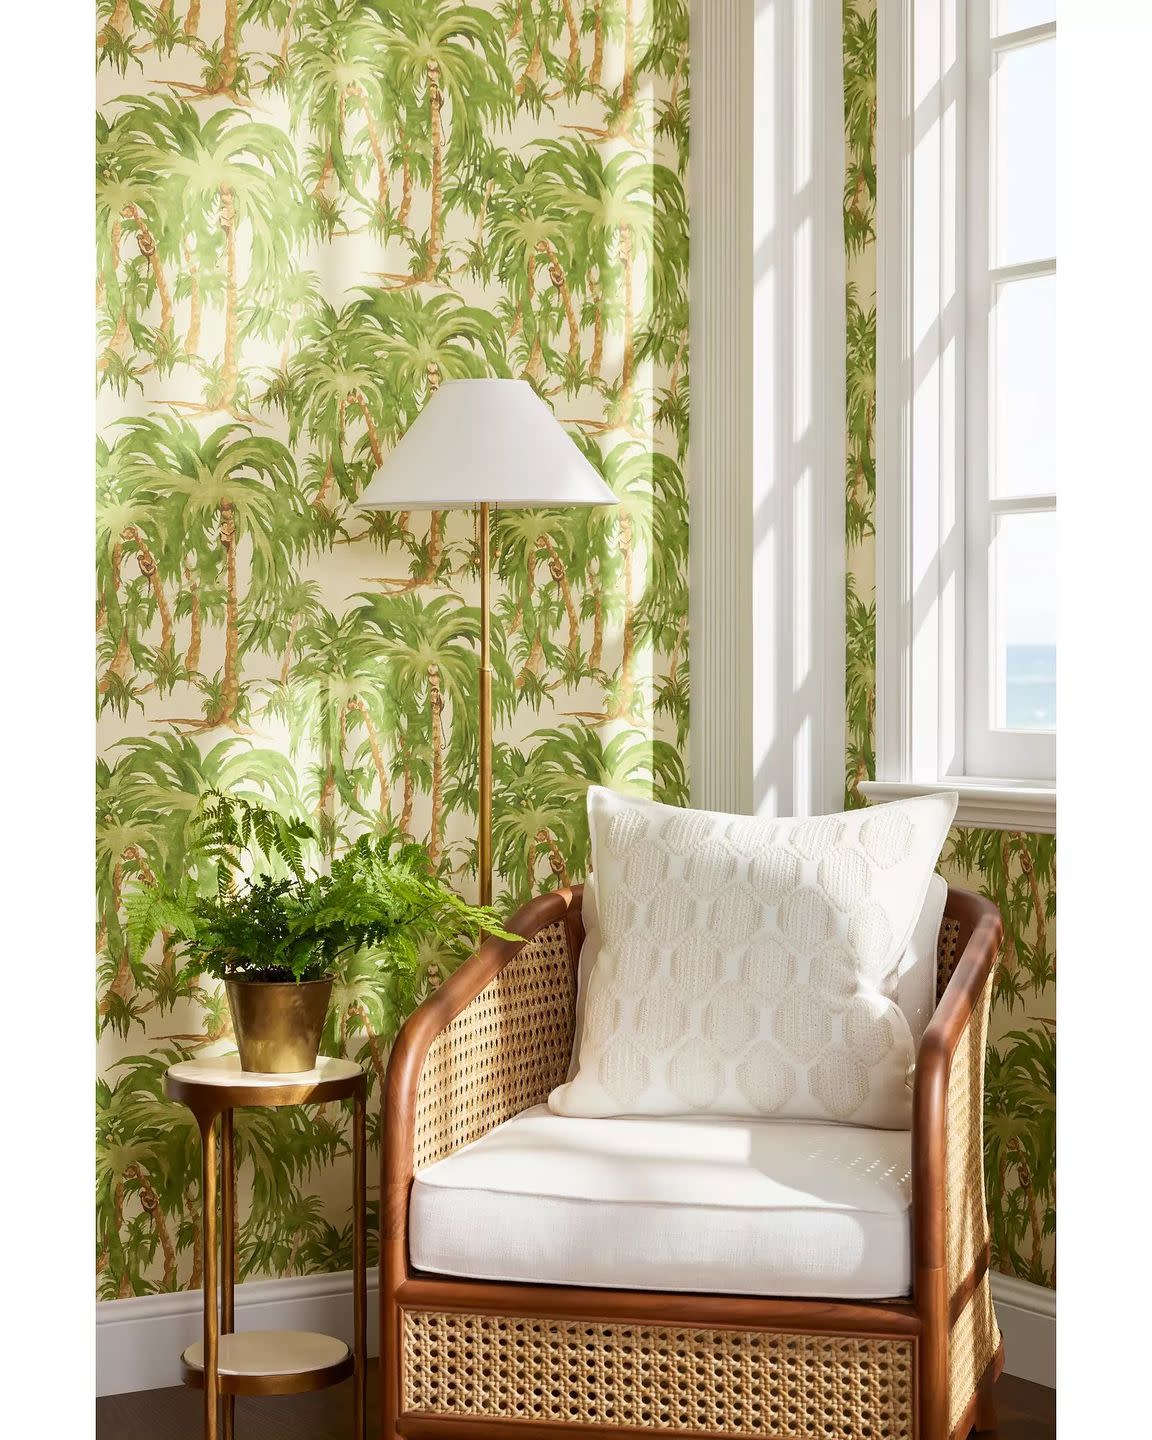 a chair with a lamp and plants